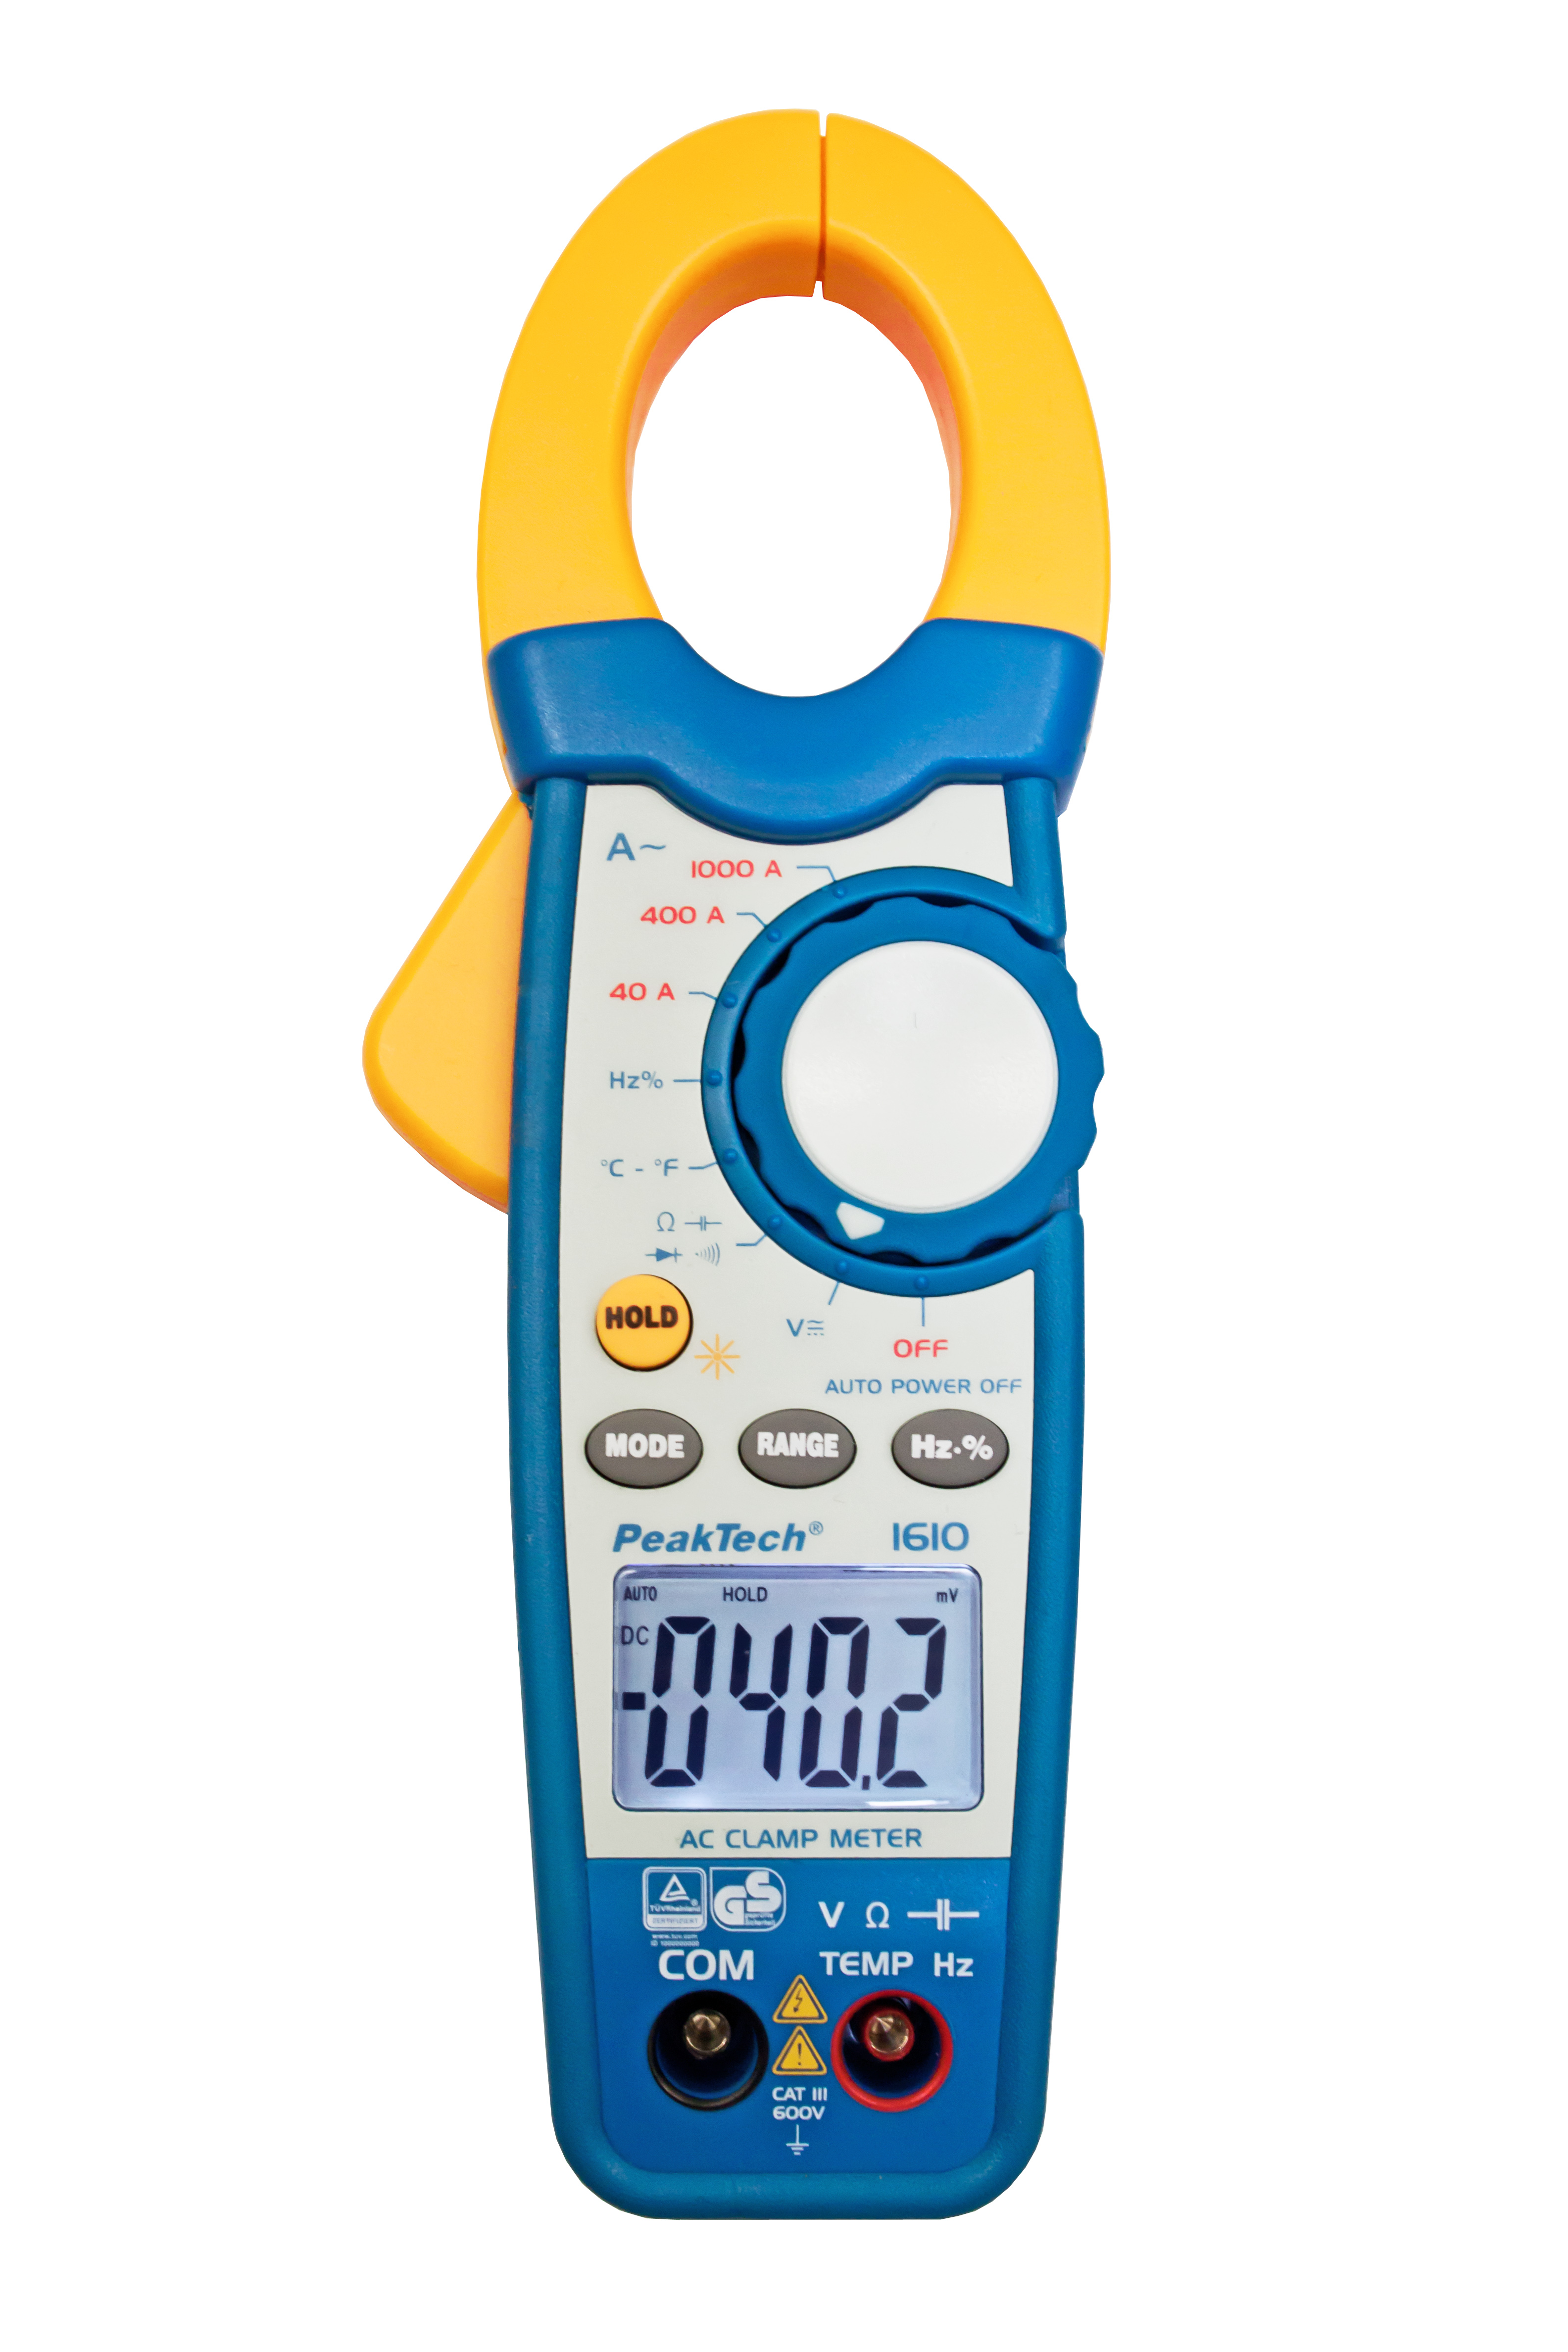 «PeakTech® P 1610» Clamp meter 4,000 counts 1000 A AC